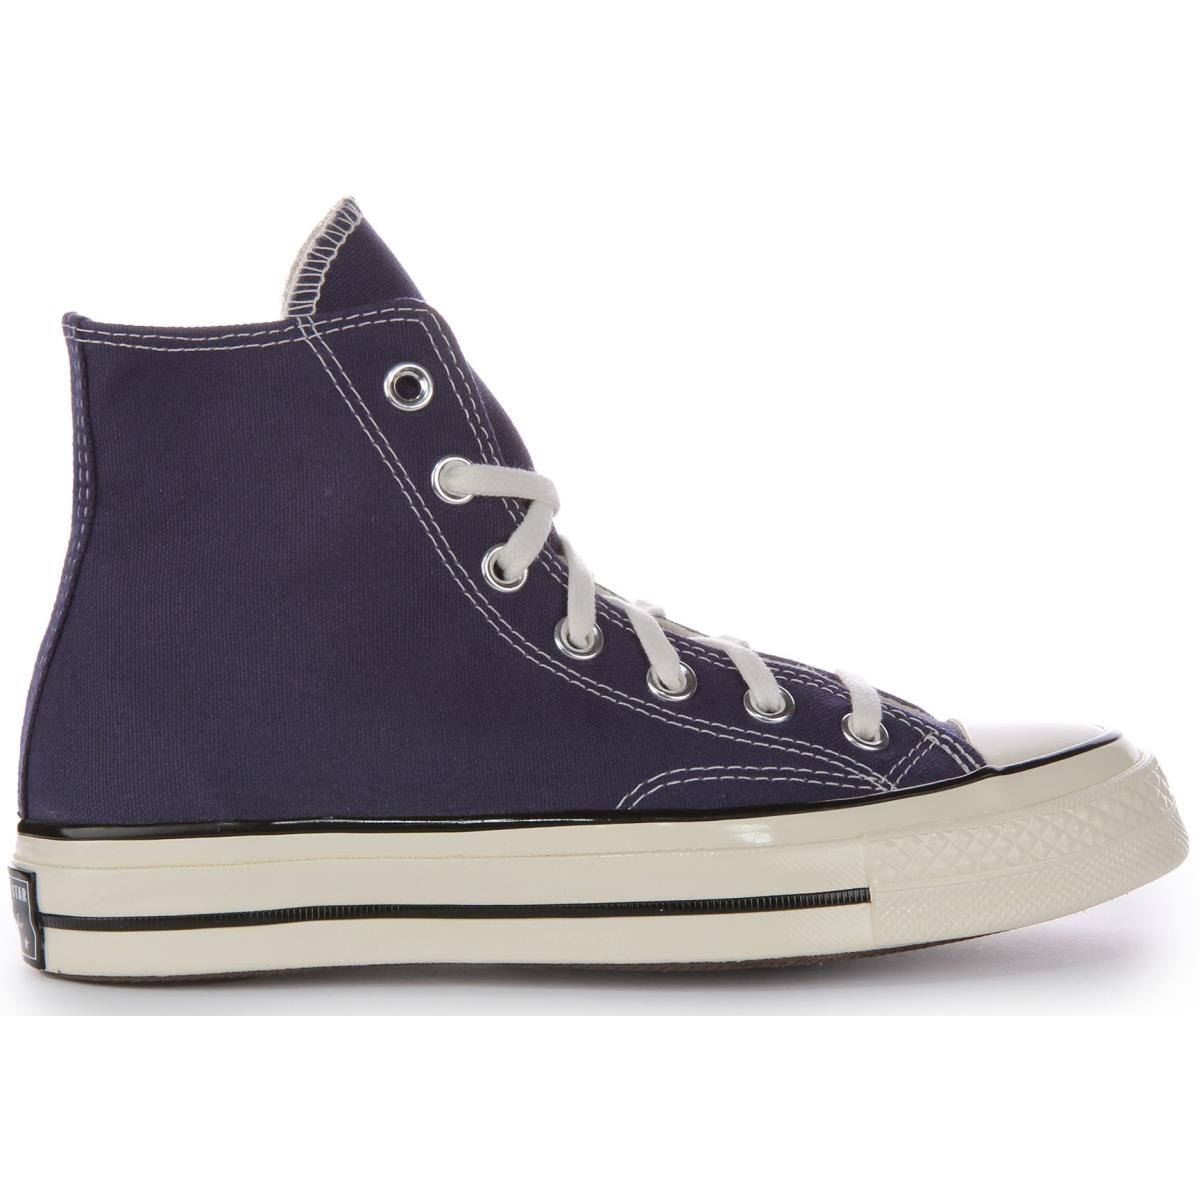 Converse A04589C Chuch 70 Hi Lace Up Trainer In Navy Mens US 6 - 12 - NAVY